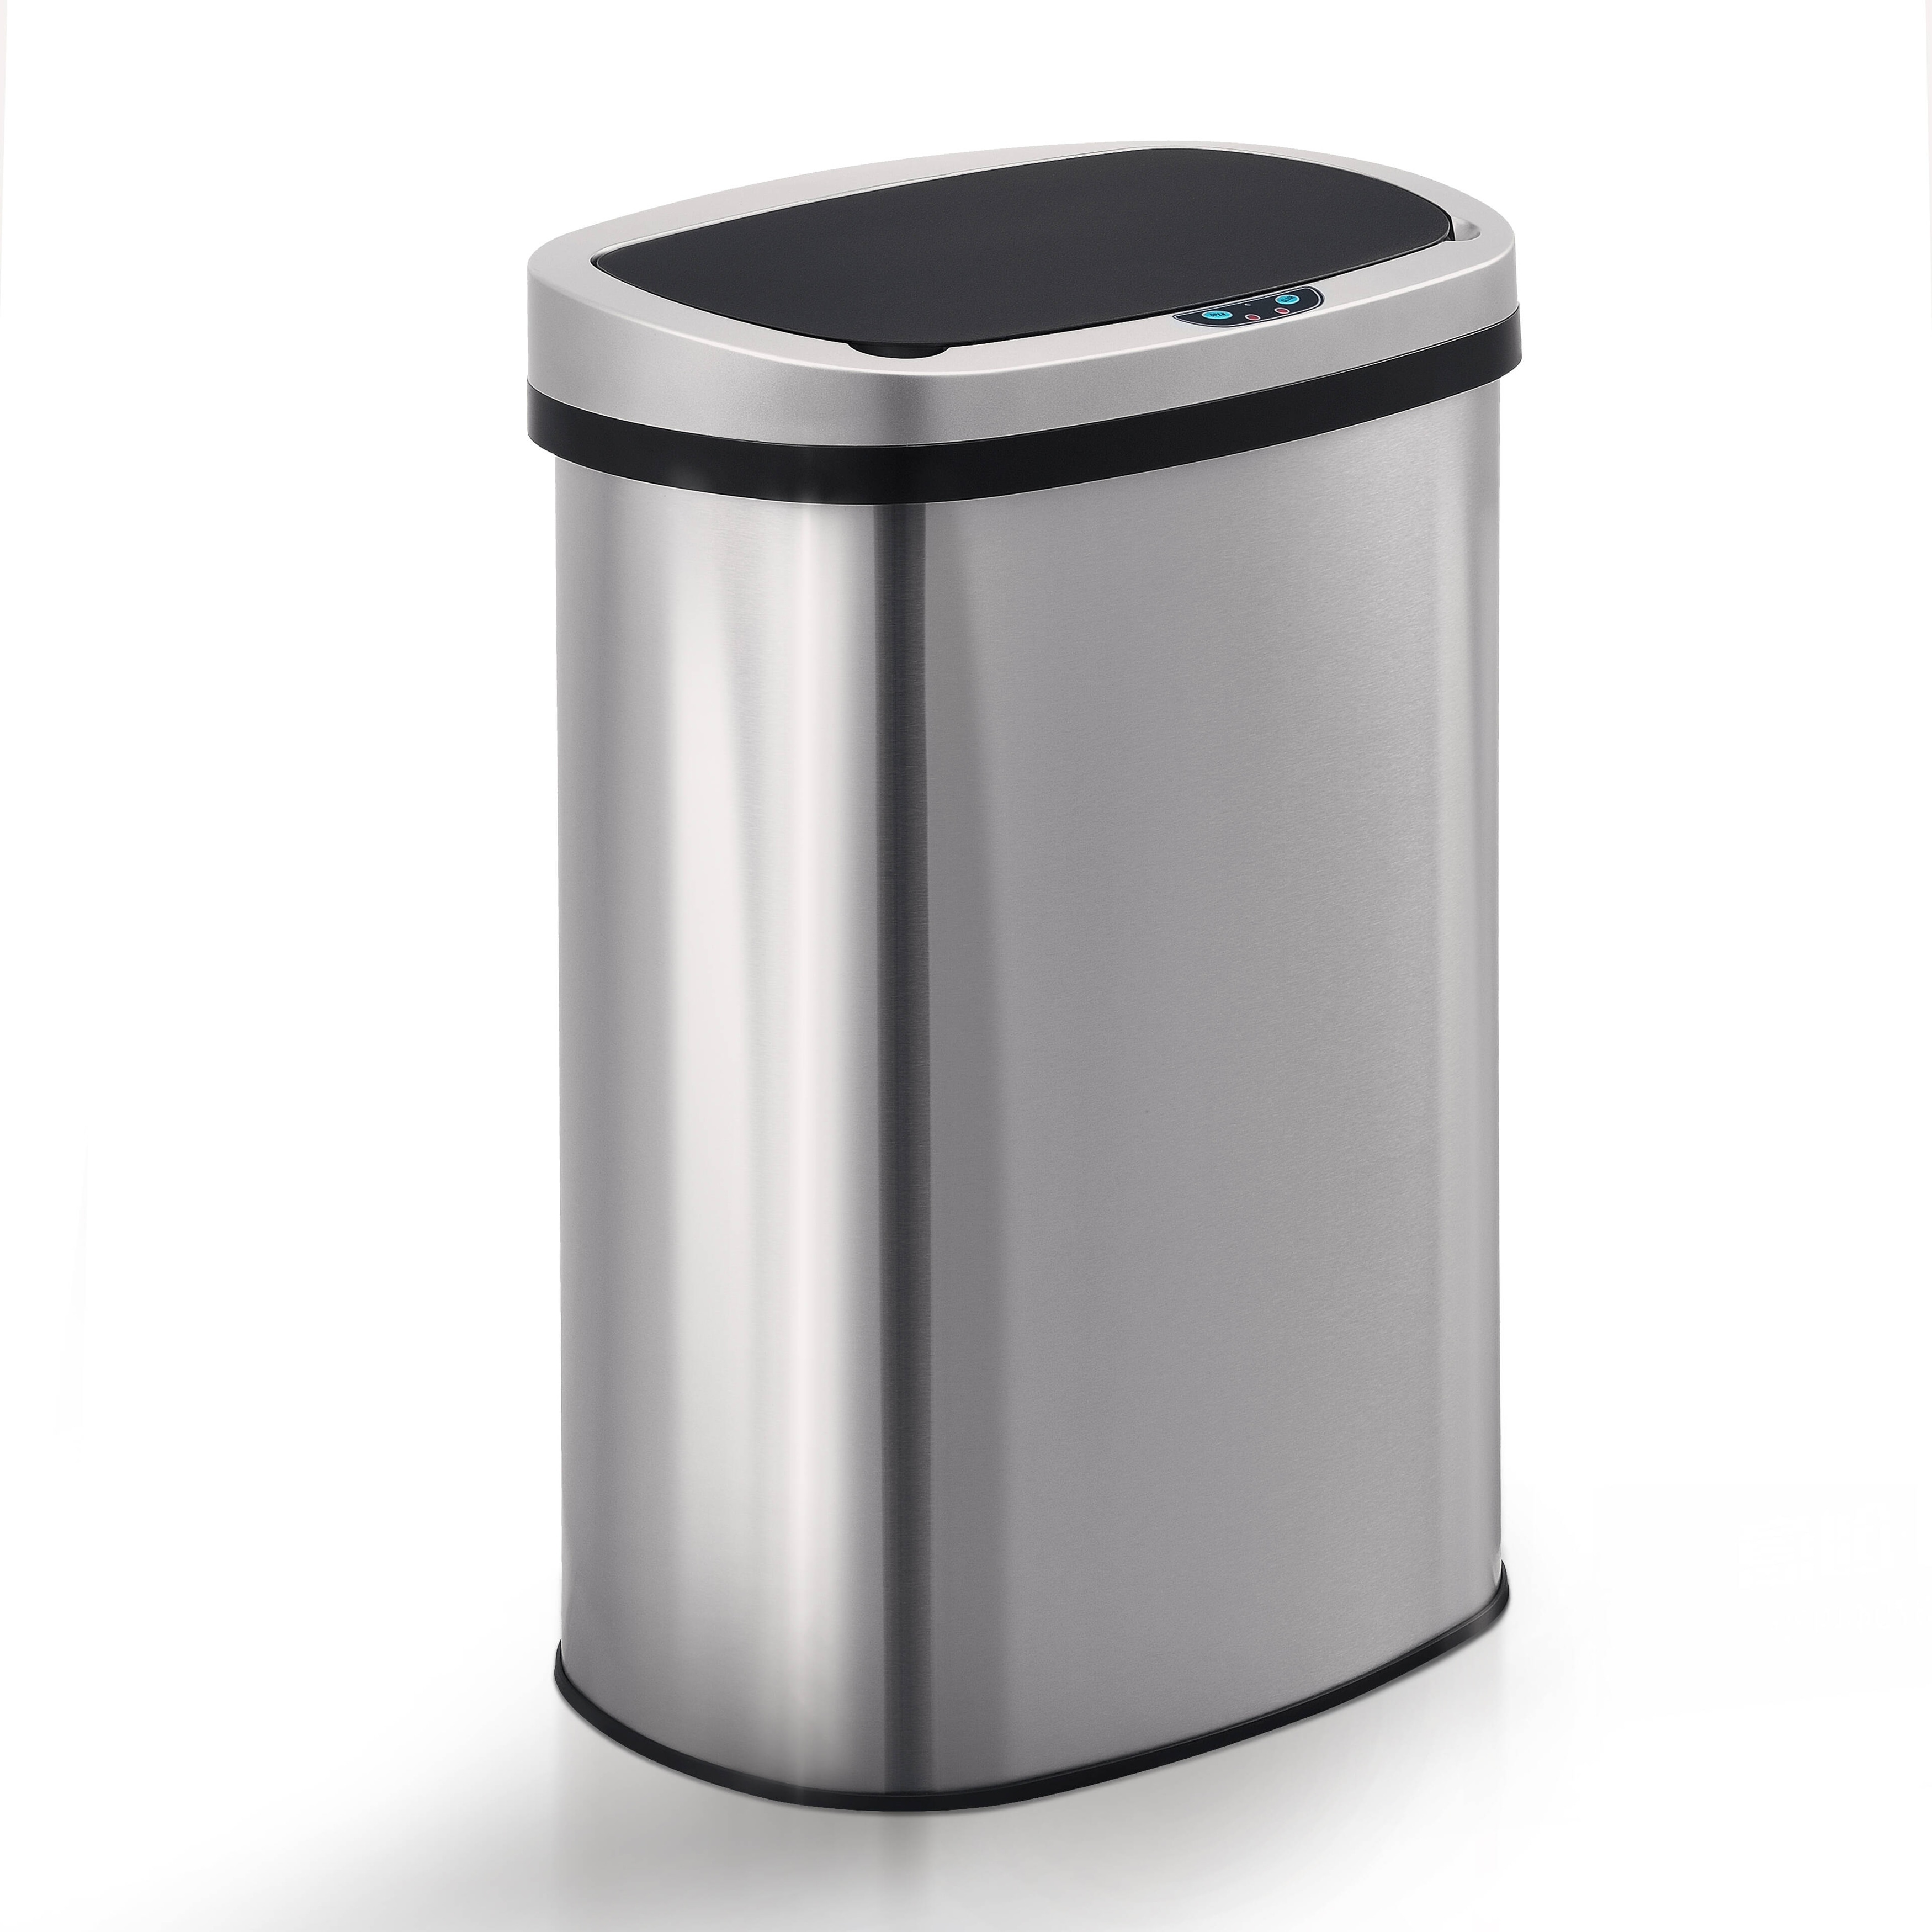 50 Liter SoftStep Stainless Steel Kitchen Trash Can, Size: 13 Gal